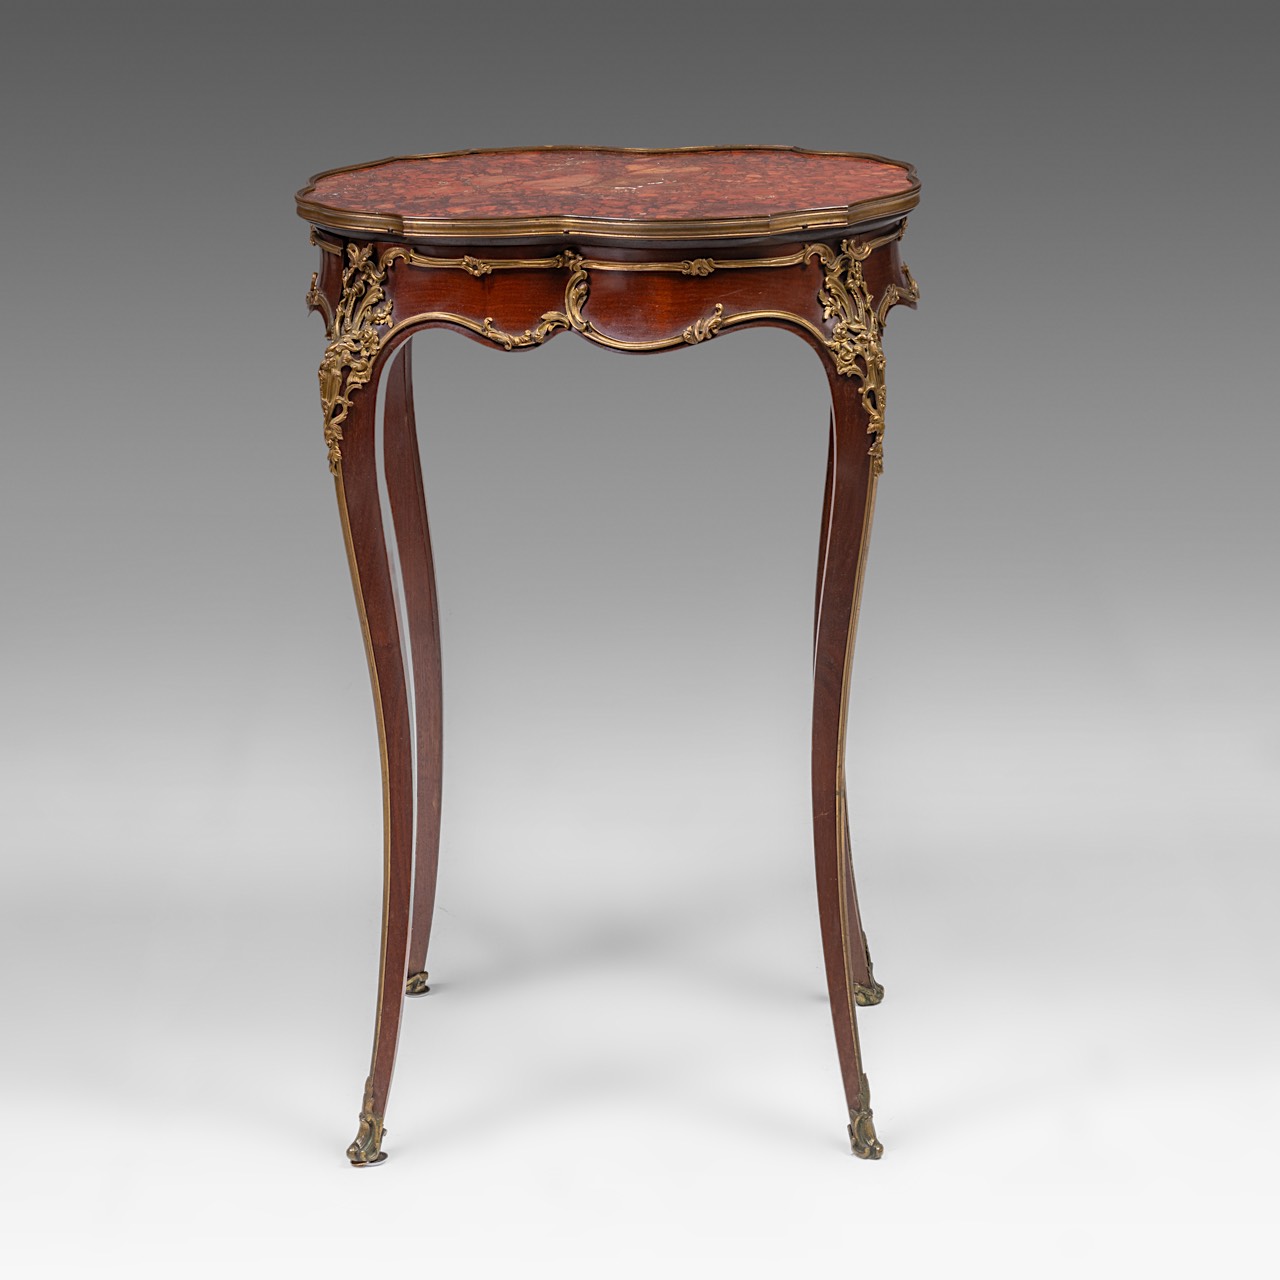 A mahogany marble-topped Louis XV (1723-1774) occasional table with gilt bronze mounts, H 77,5 cm - - Image 4 of 9